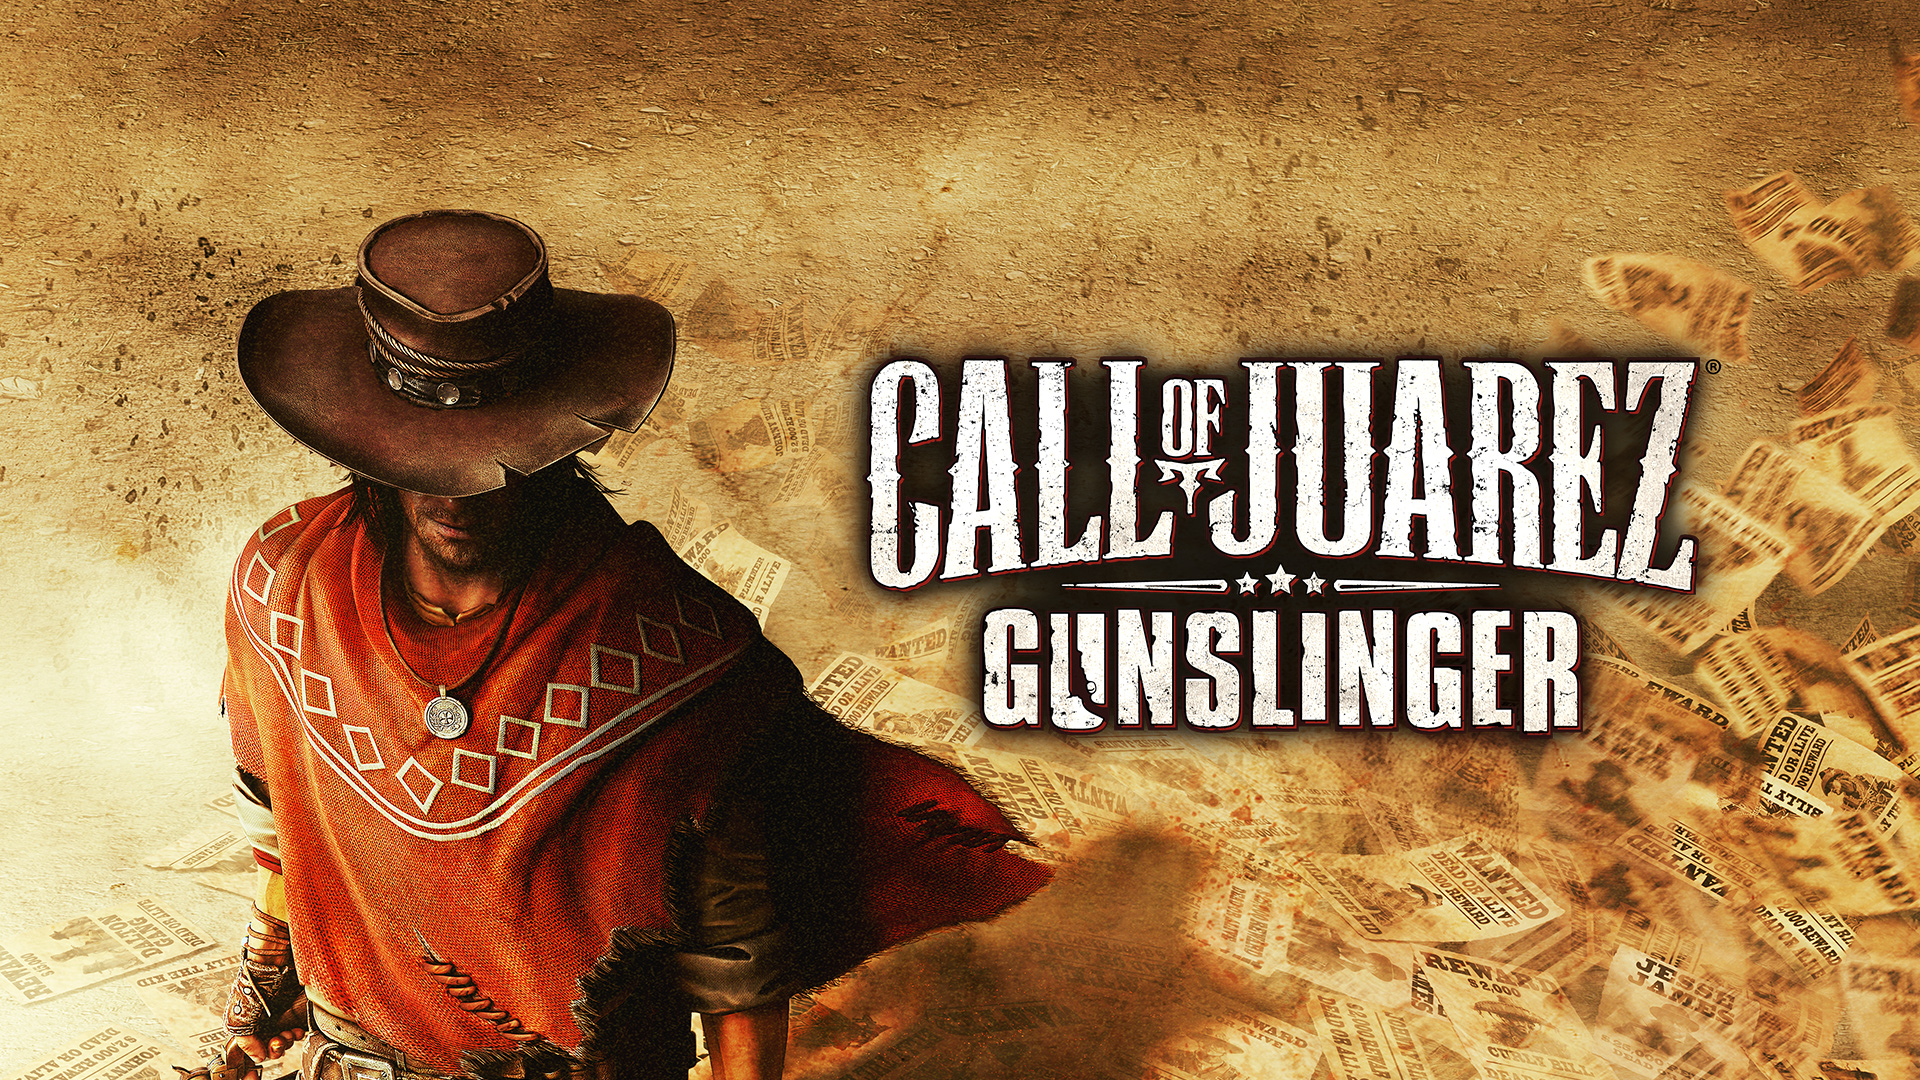 Gunslinger steam is required фото 58